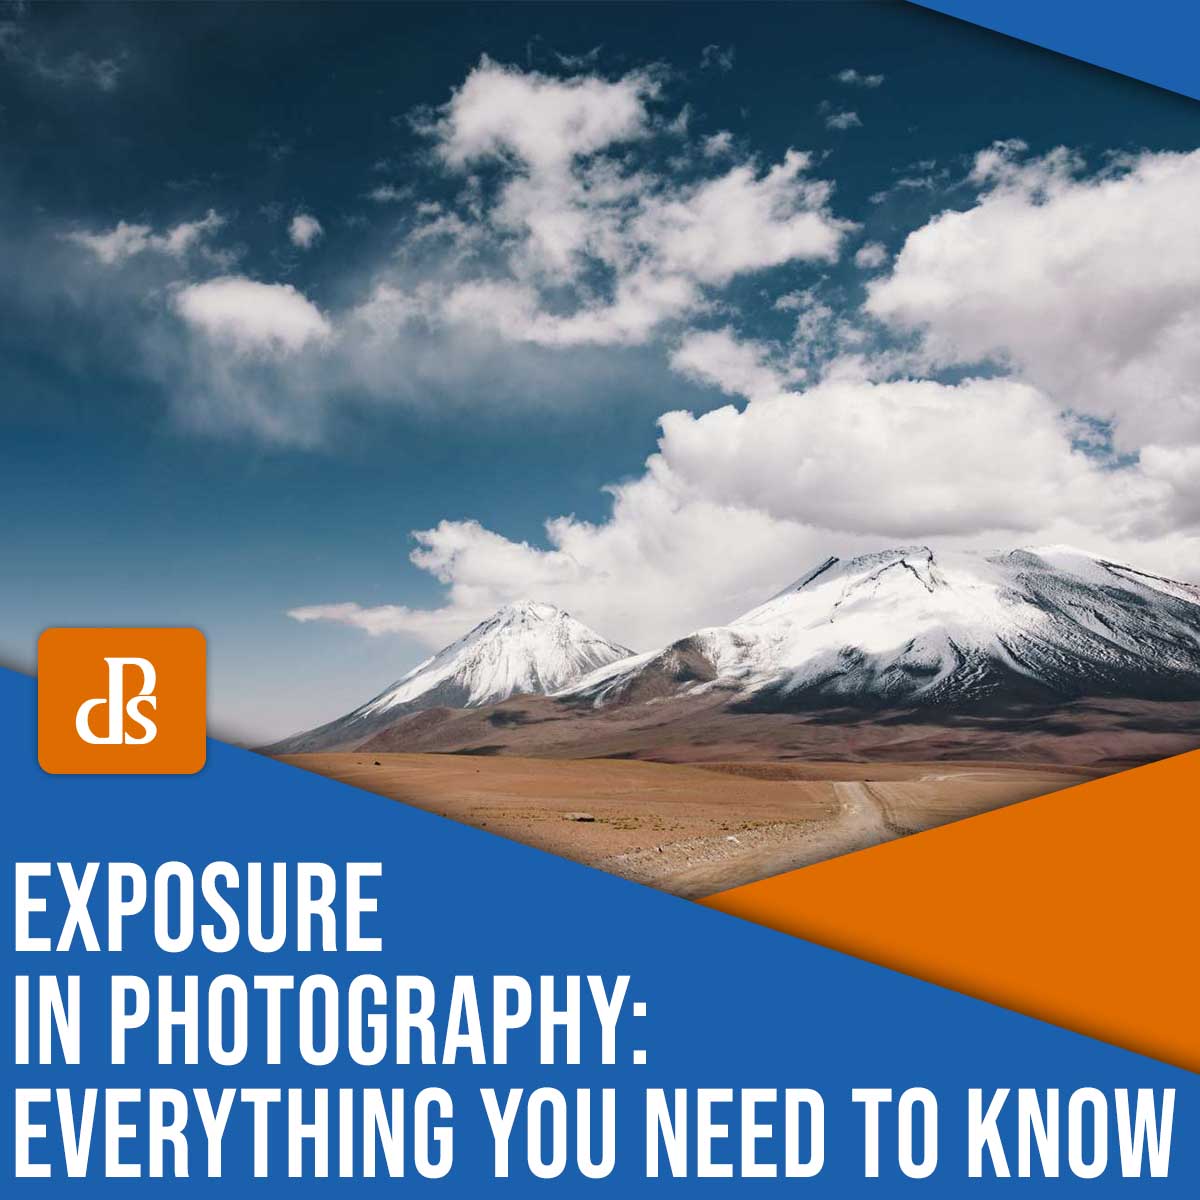 exposure in photography: everything you need to know